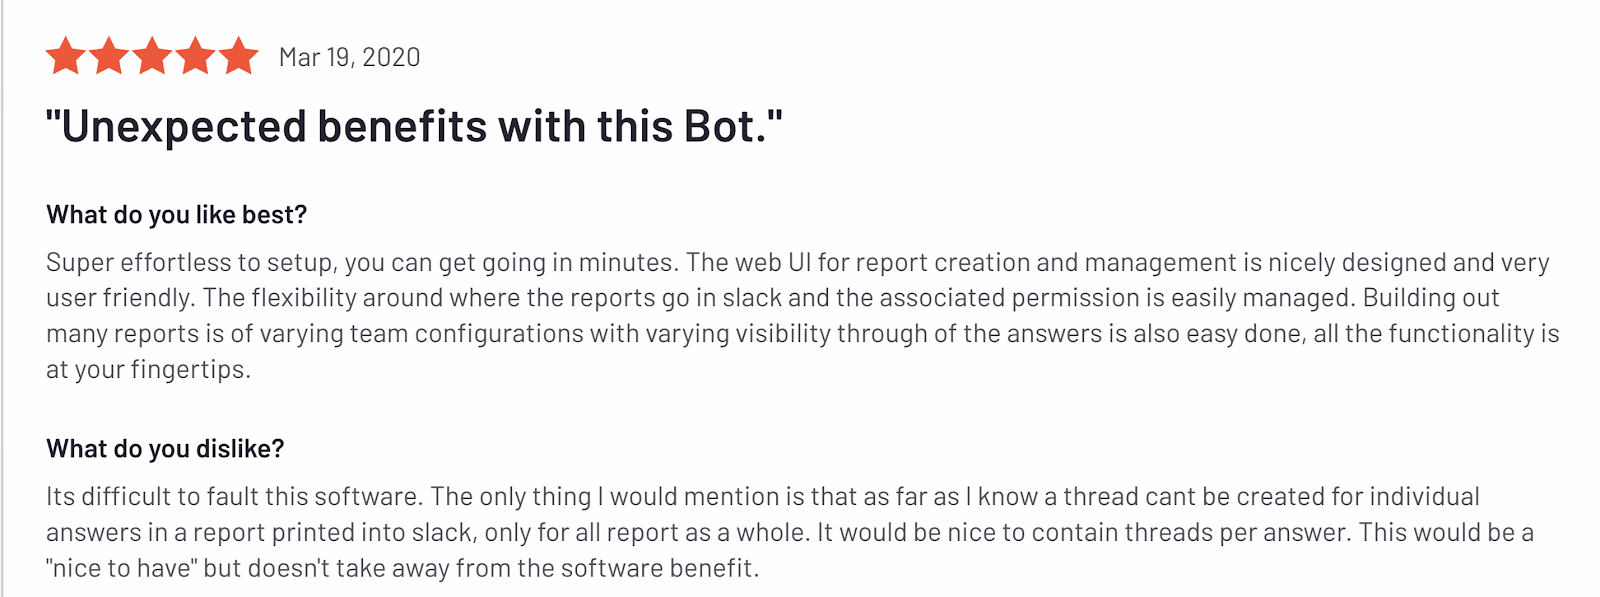 A Geekbot review on G2: "Unexpected benefits with this bot. Effortless setup, flexibility."